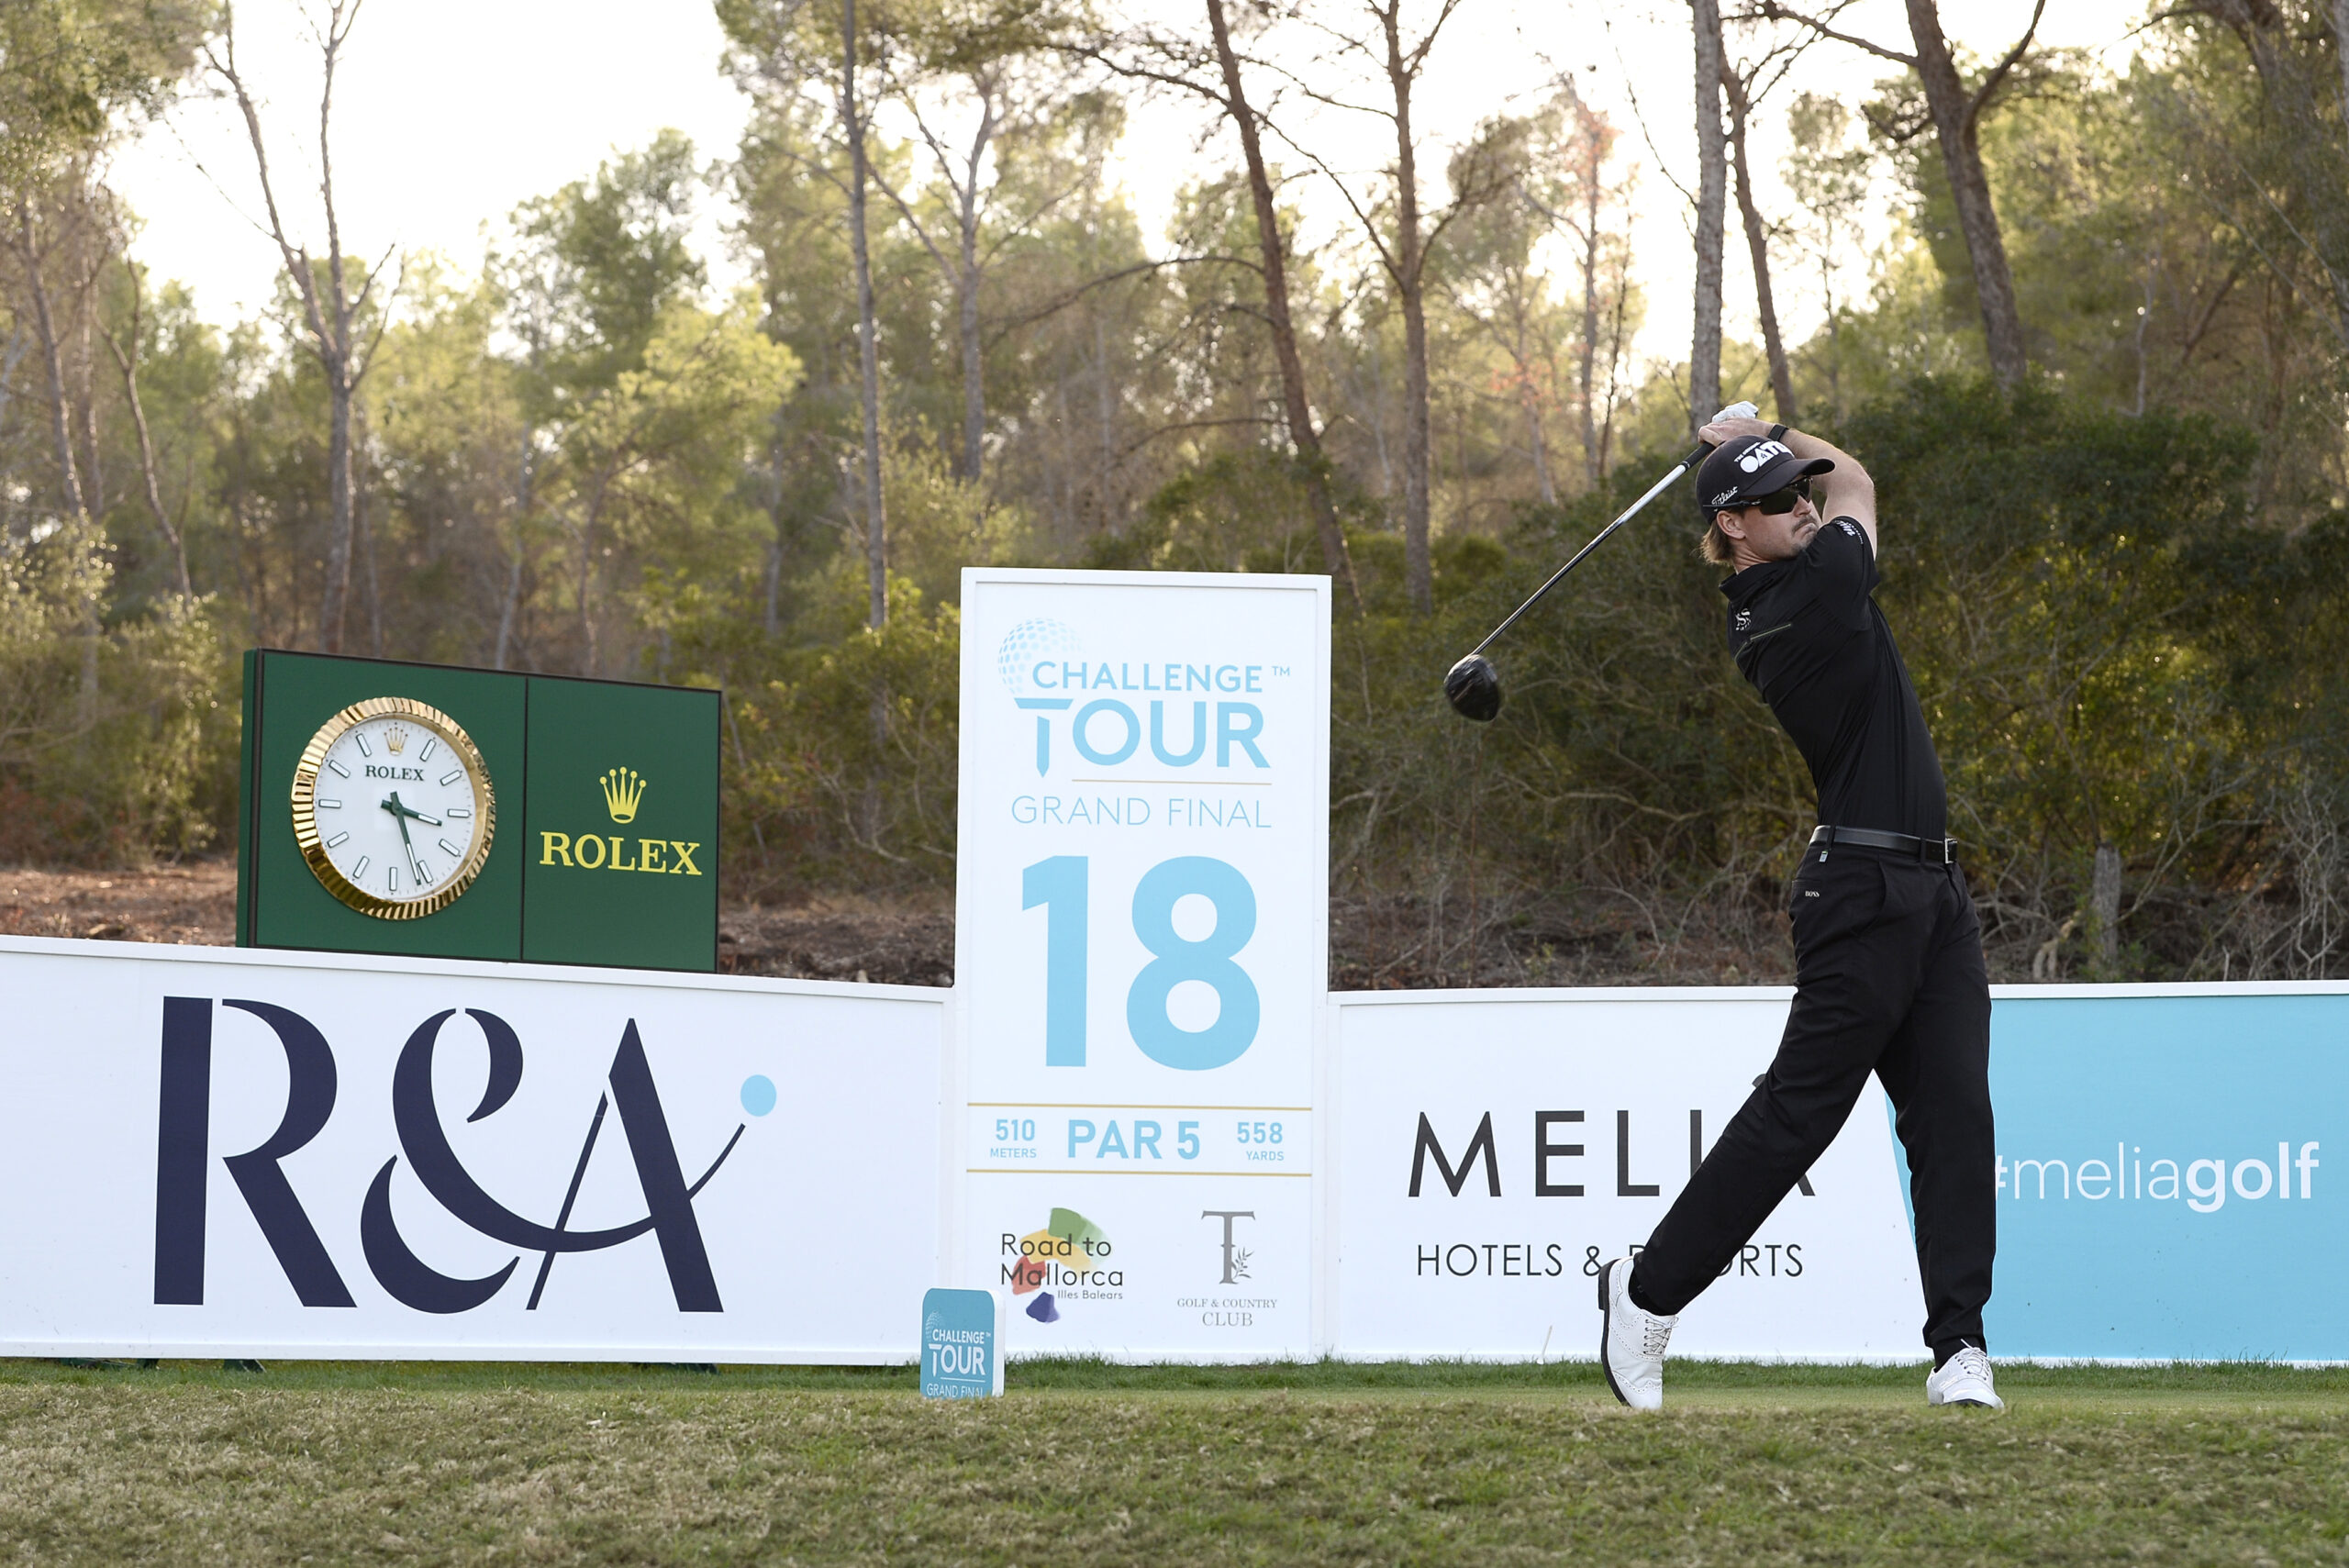 Challenge Tour Grand Final – Day Four